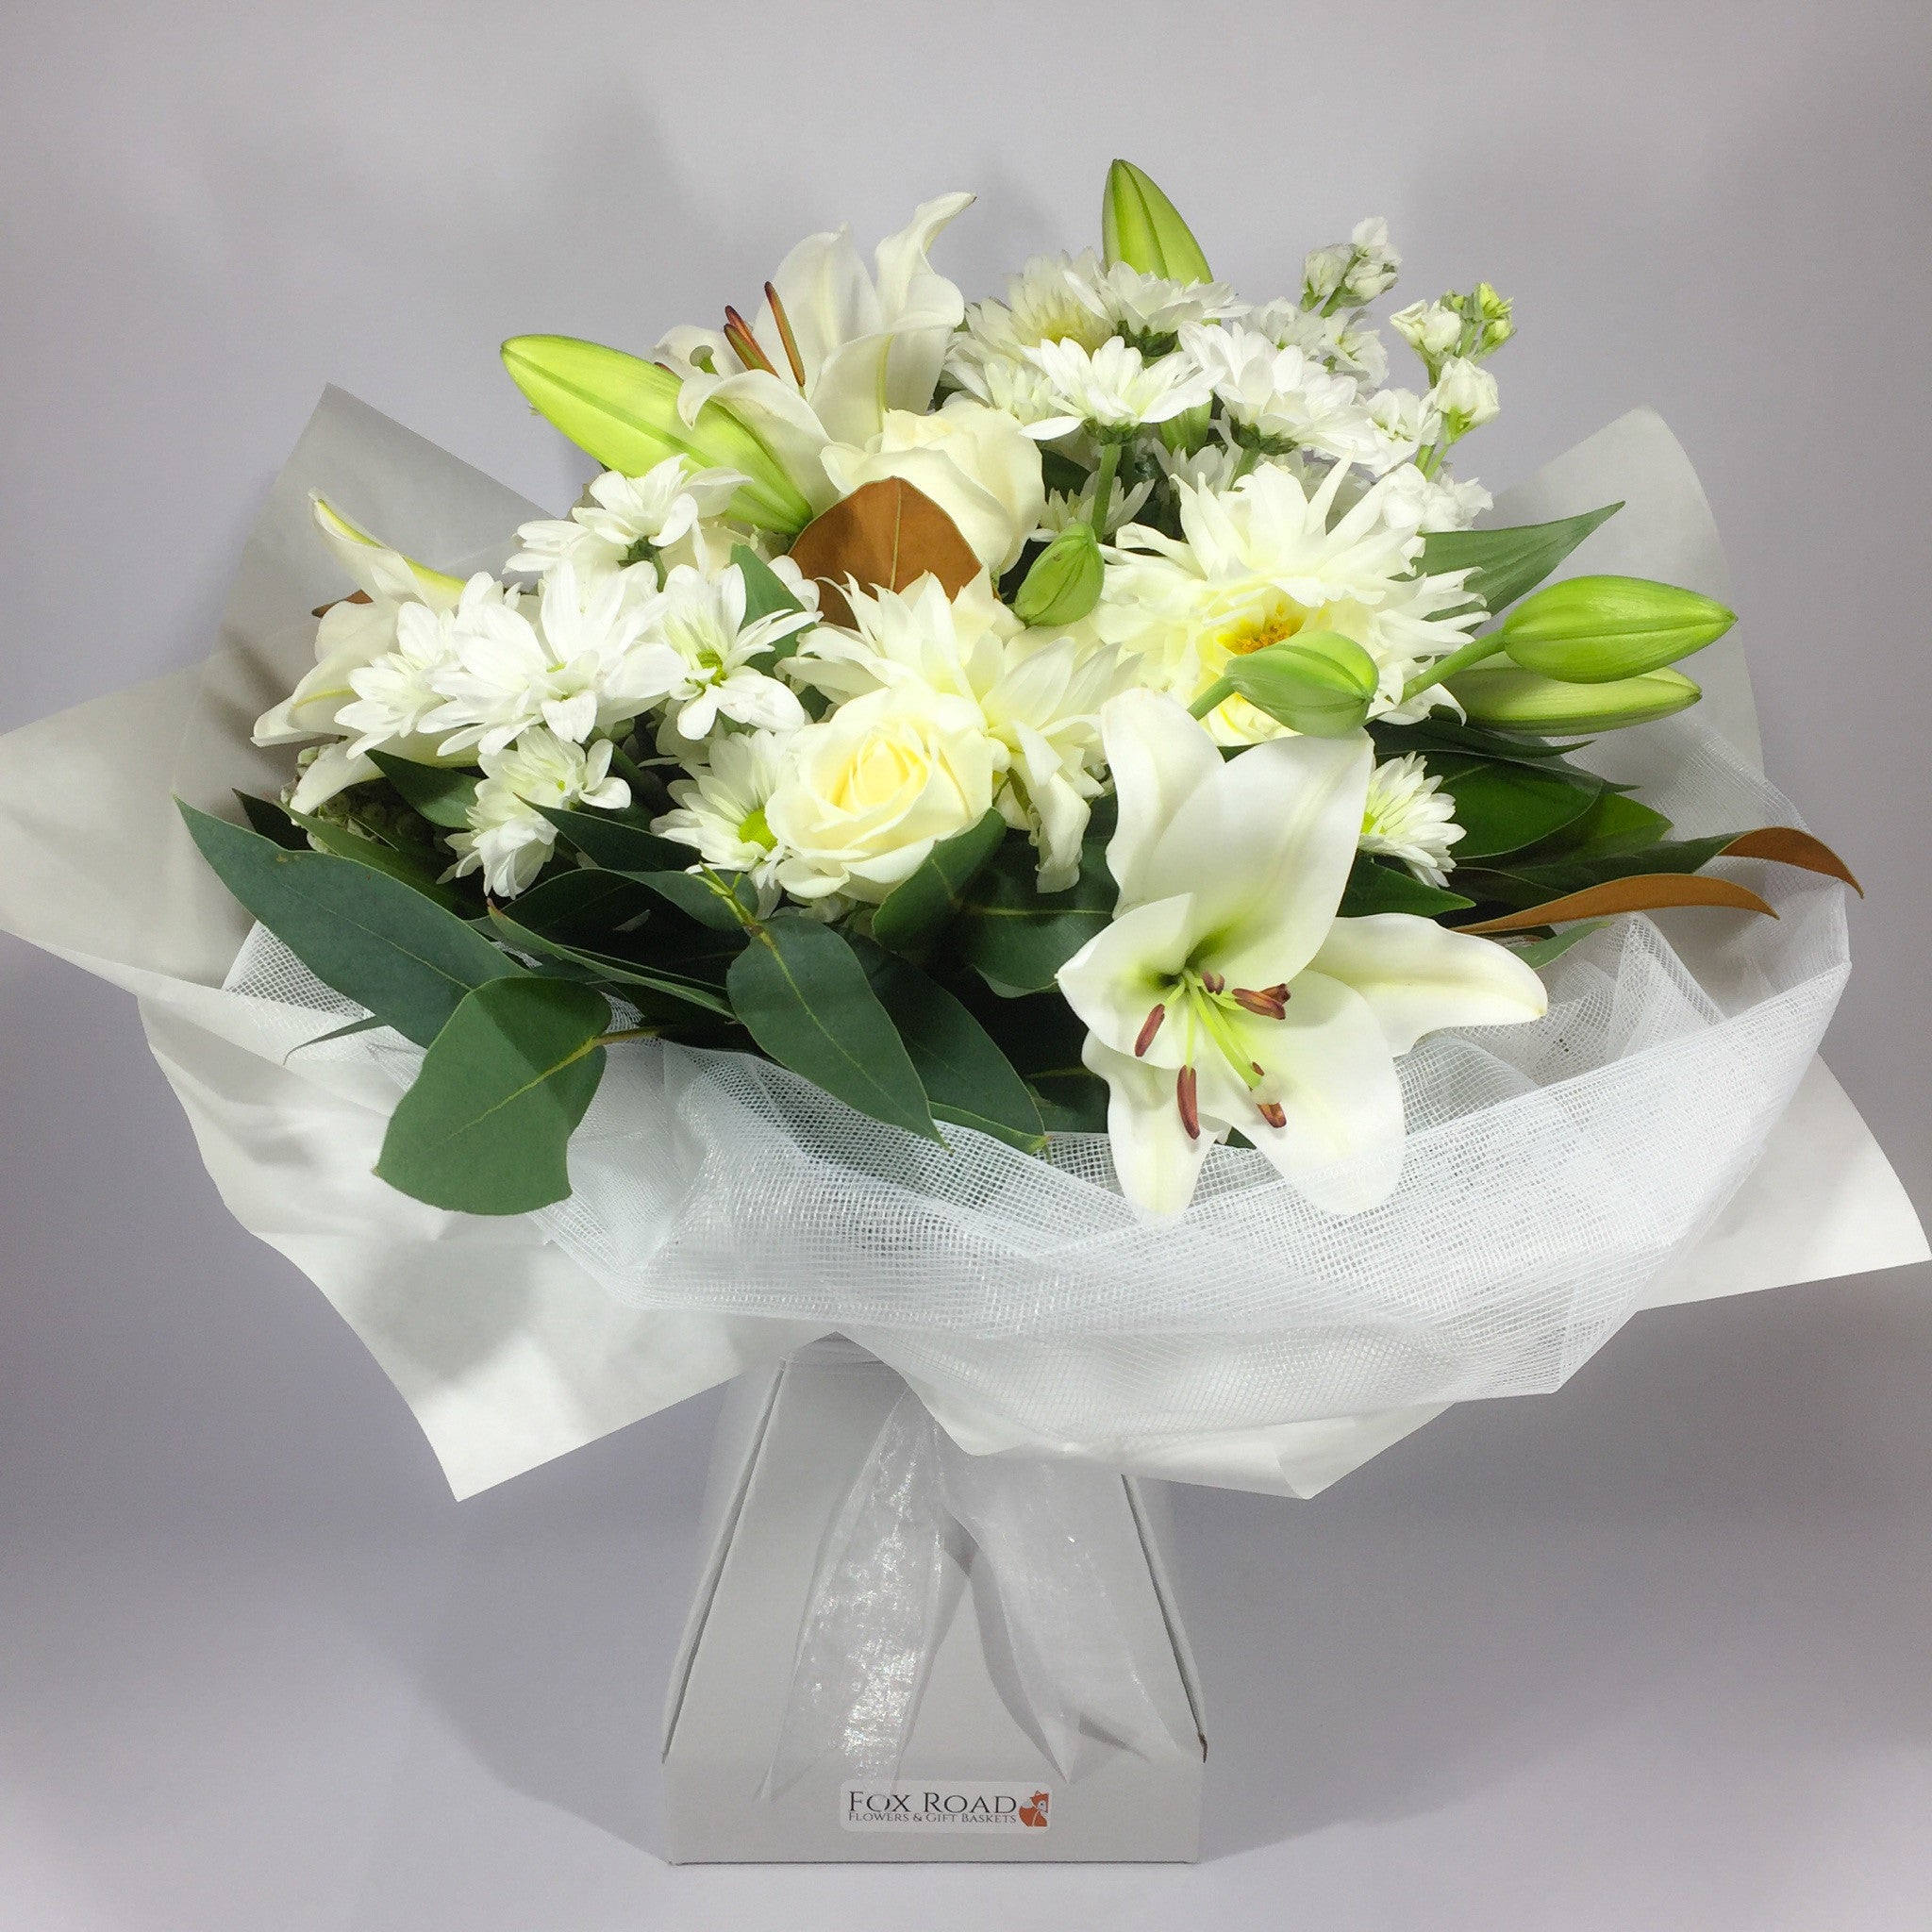 Delivered from Porirua, these flowers are beautiful